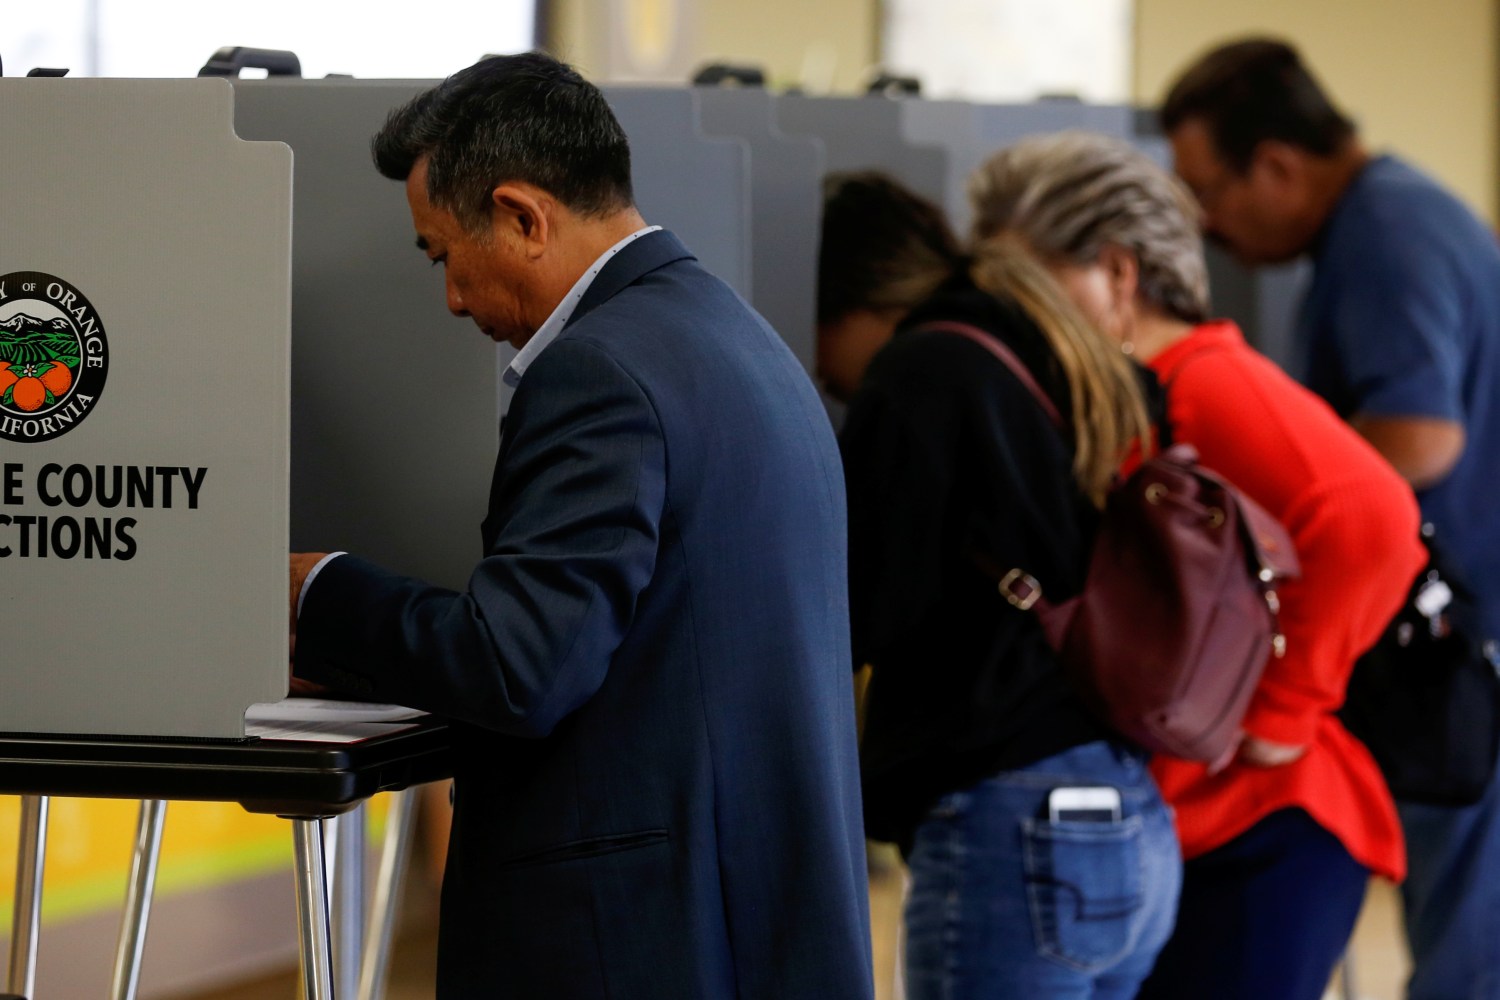 California voters cast their ballots in the March 3 Super Tuesday primary as new voting procedures and technology are used to make voting easier and more secure in Santa Ana, California, U.S., February 24, 2020. Picture taken February 24, 2020.      REUTERS/Mike Blake